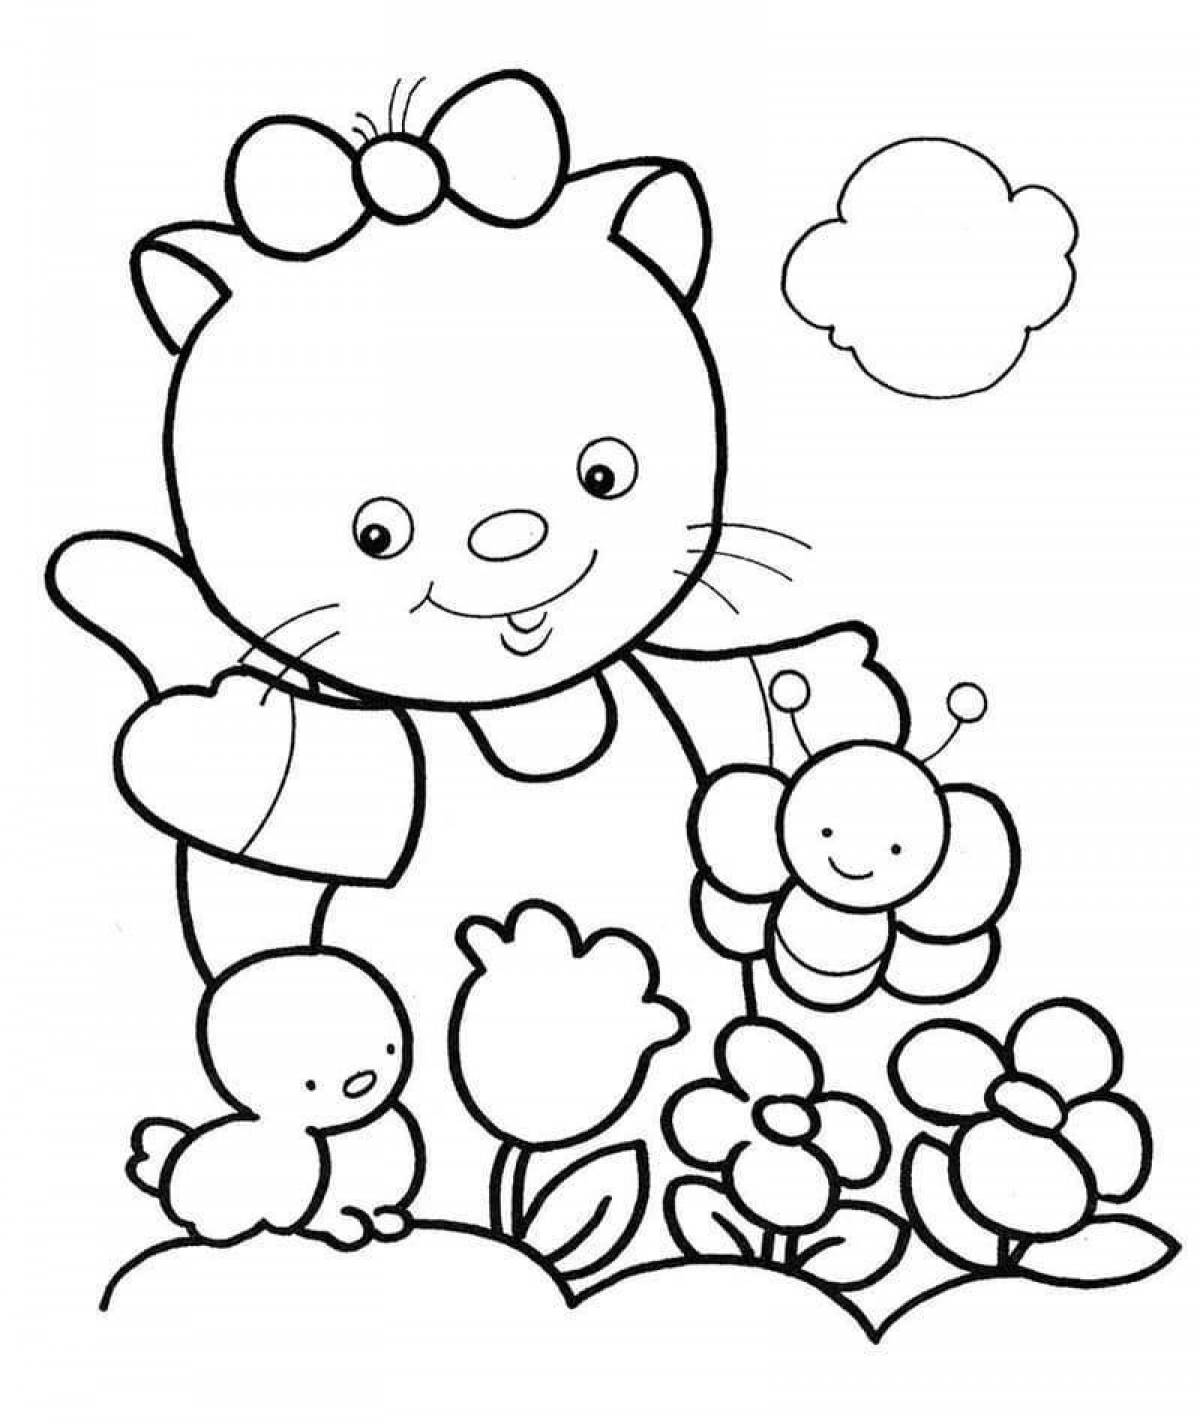 Violent coloring page 3 for girls